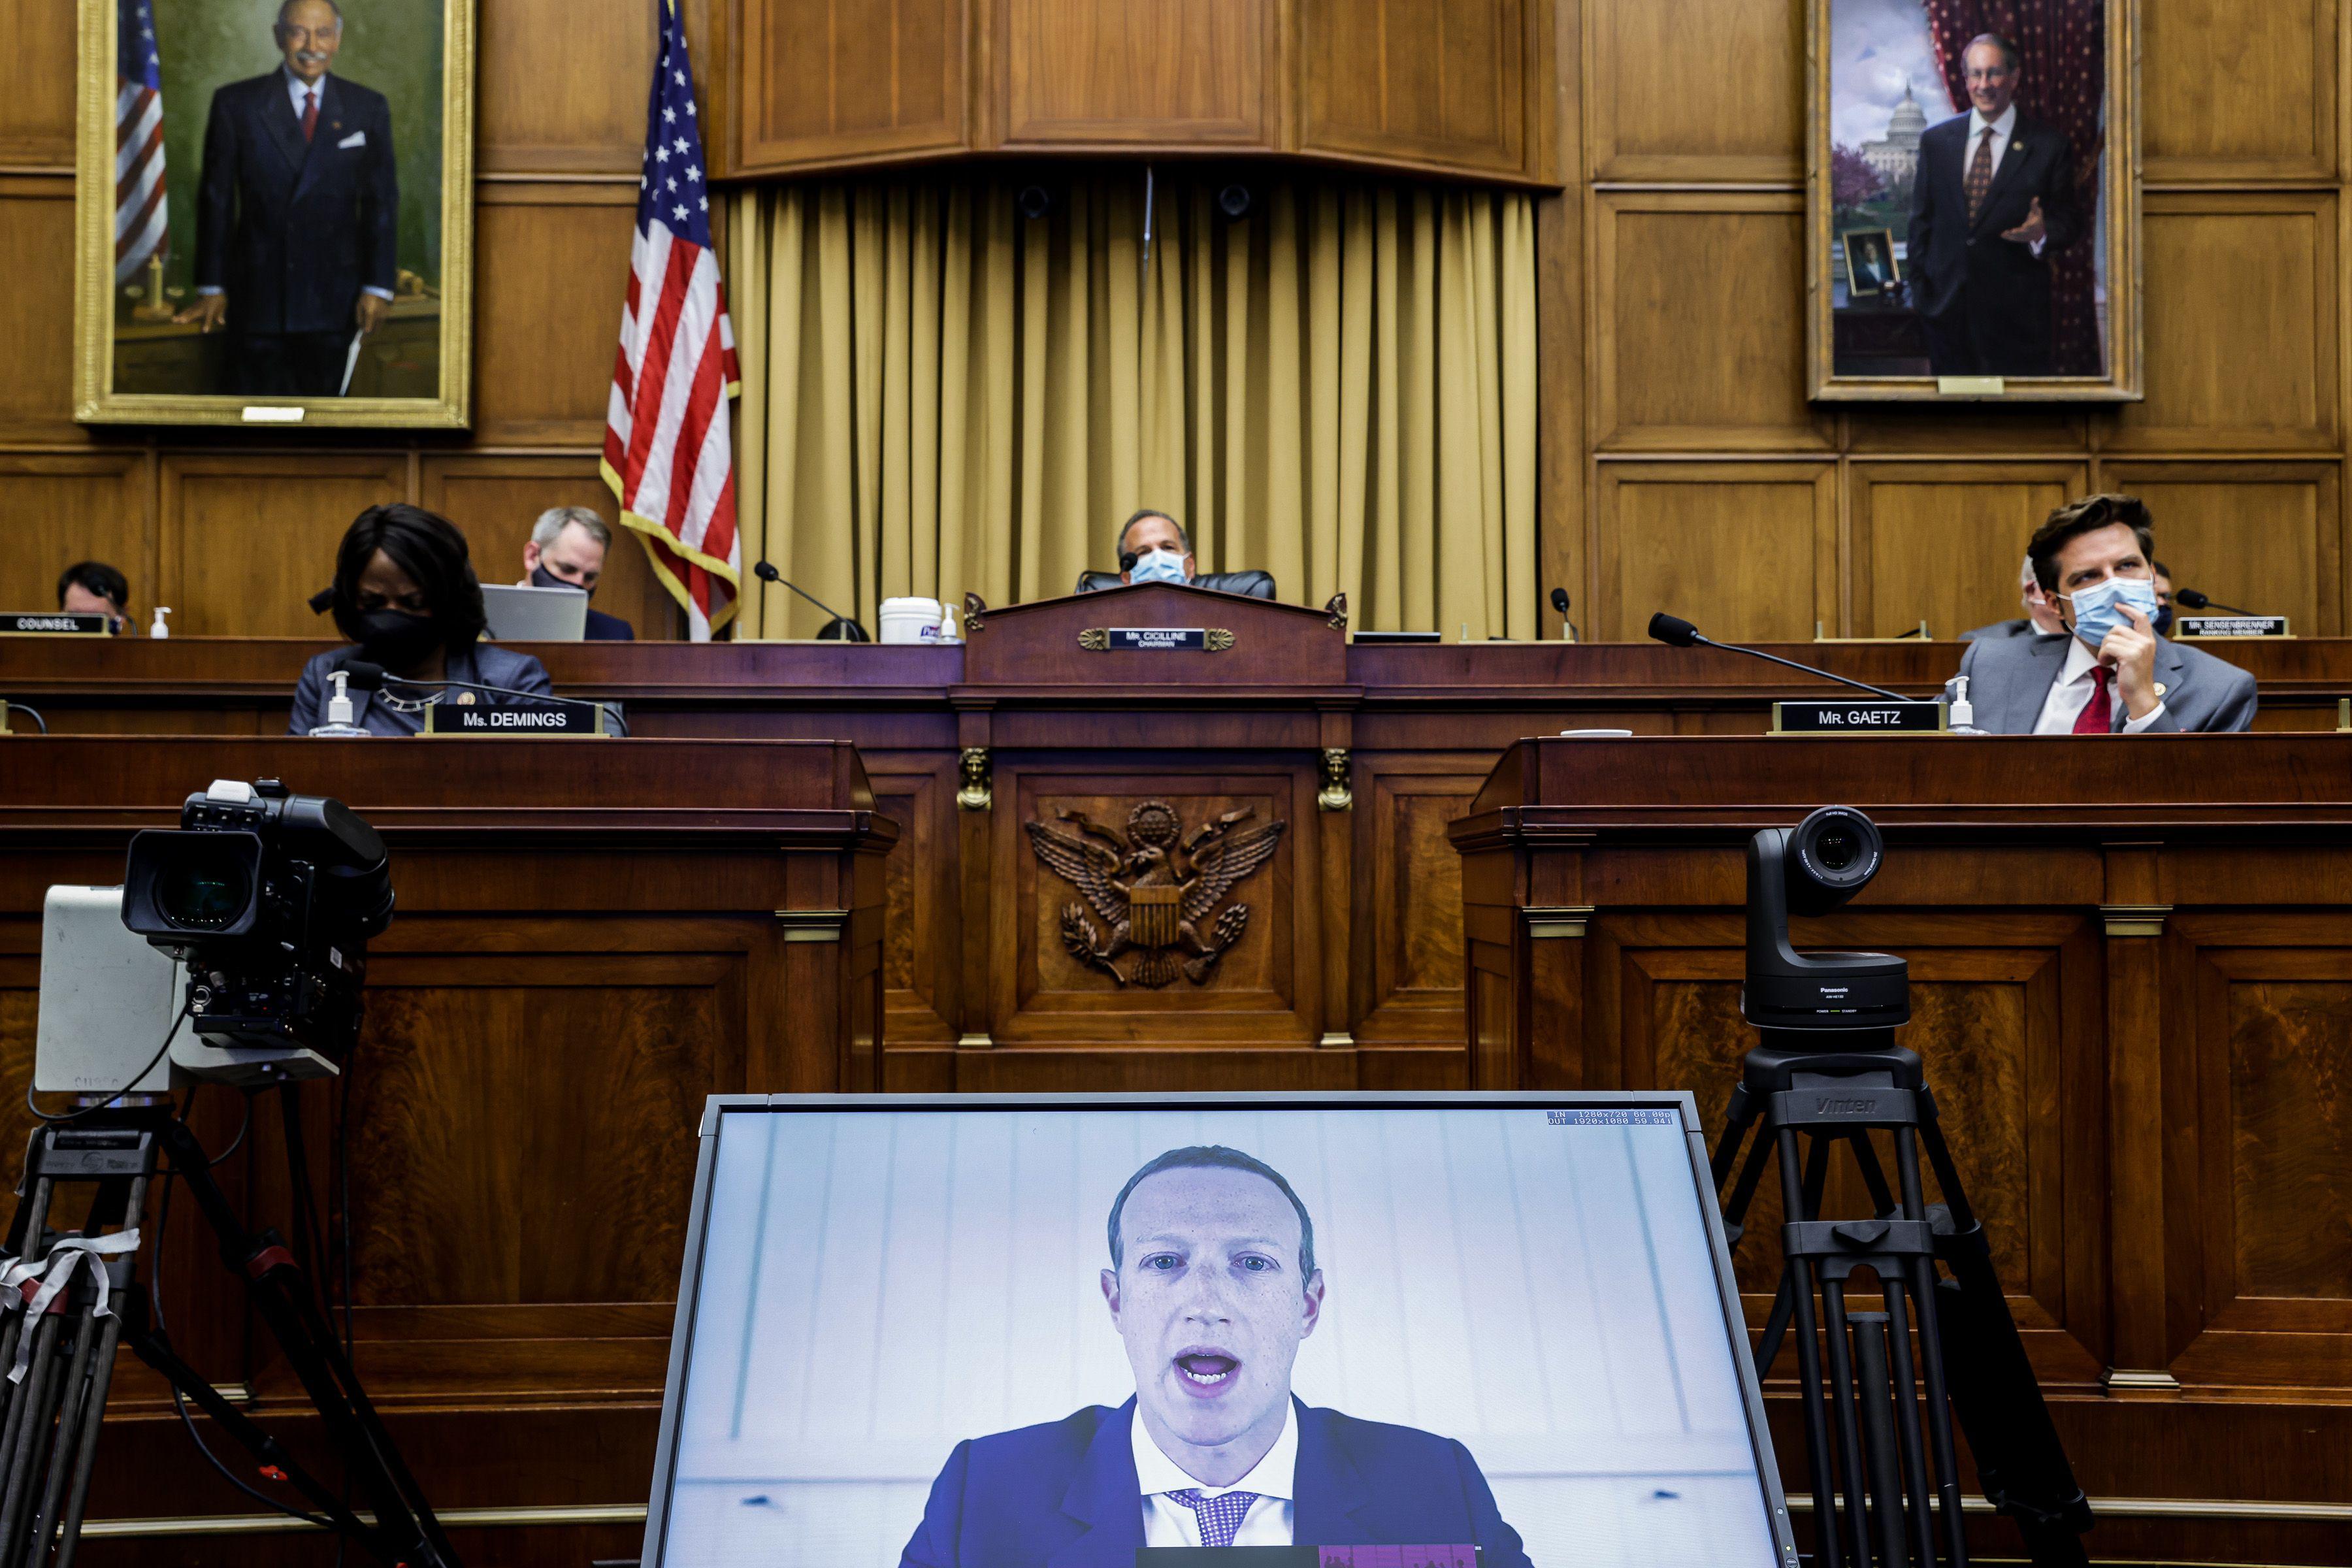 TOPSHOT - Facebook CEO Mark Zuckerberg testifies before the House Judiciary Subcommittee on Antitrust, Commercial and Administrative Law on "Online Platforms and Market Power" in the Rayburn House office Building on Capitol Hill in Washington, DC on July 29, 2020. (Photo by Graeme JENNINGS / POOL / AFP) (Photo by GRAEME JENNINGS/POOL/AFP via Getty Images)